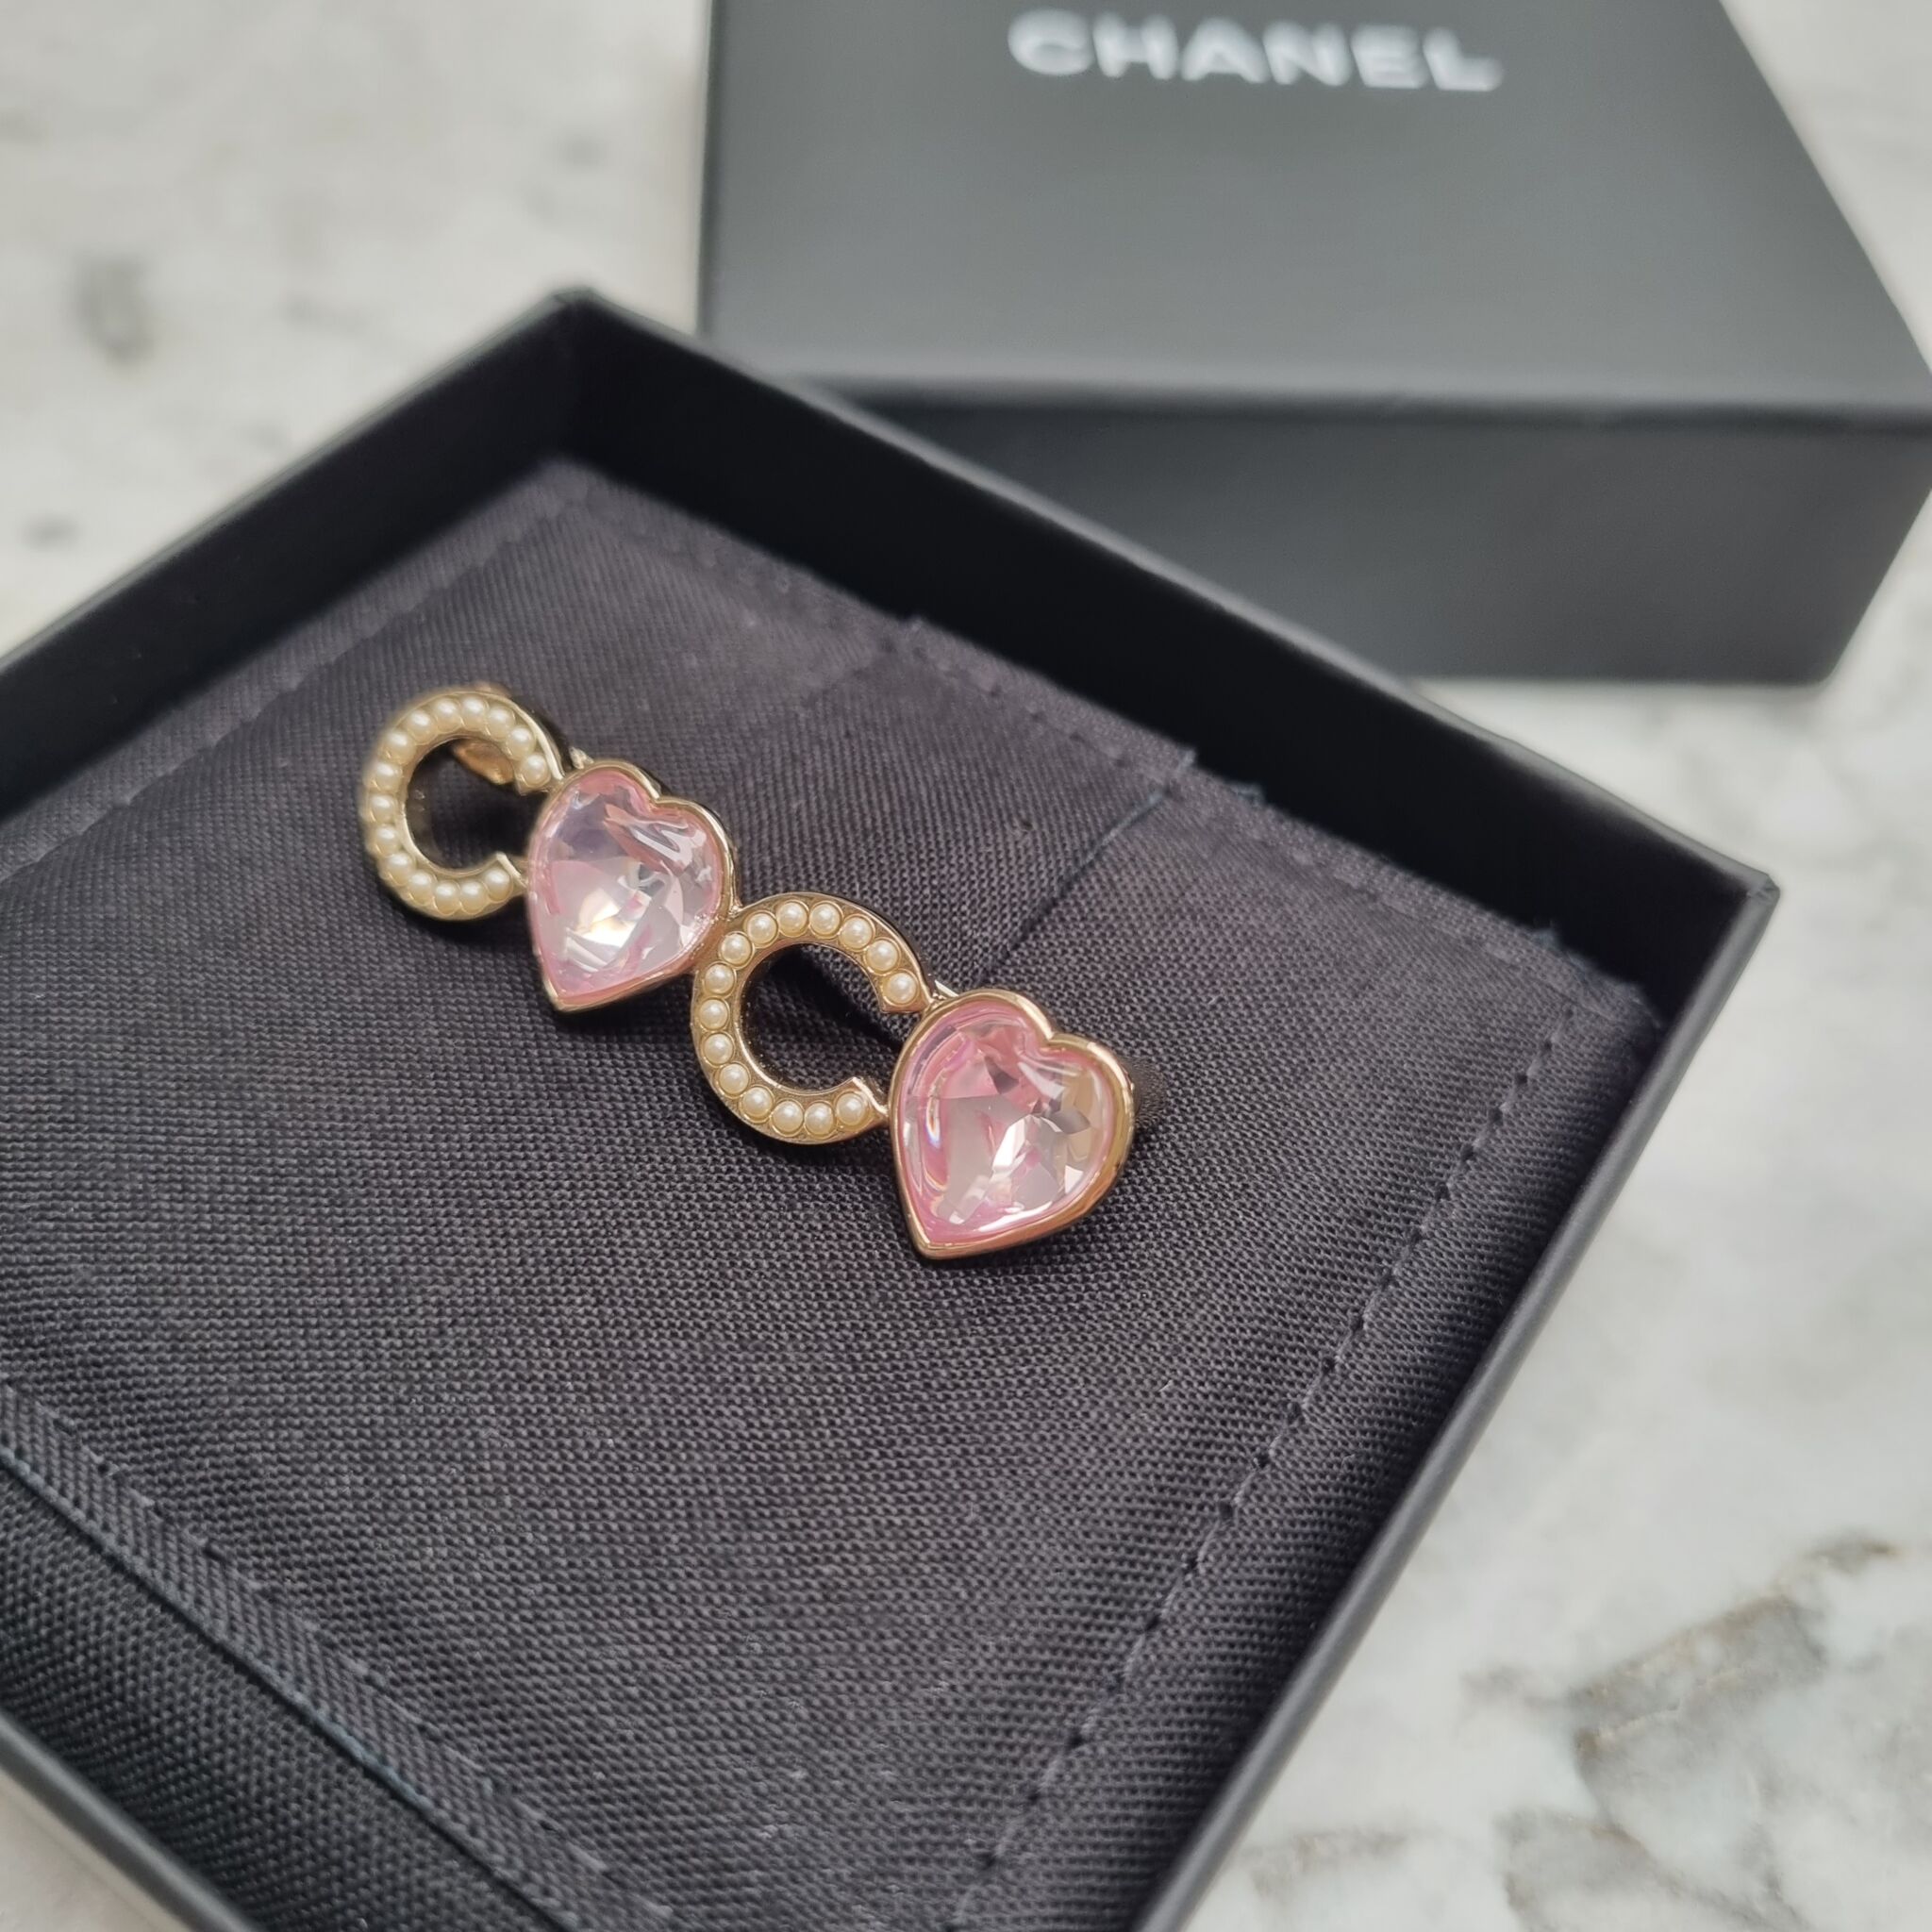 Chanel Coco Brooch, Gold - Laulay Luxury